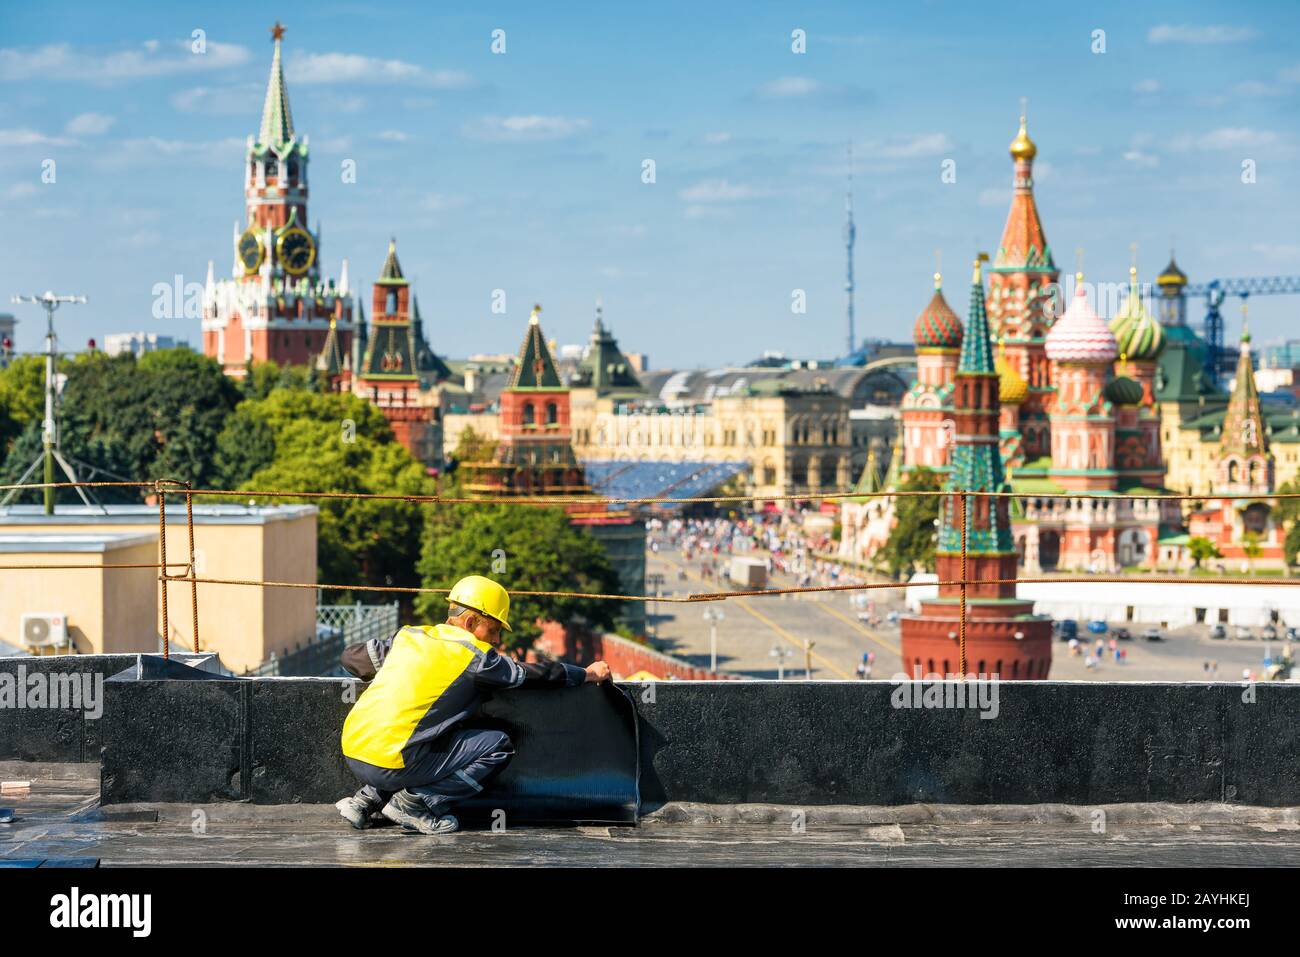 Moscow, Russia - August 10, 2017: The worker works at a construction site in the center of Moscow. Moscow Kremlin and Saint Basil`s Cathedral in the b Stock Photo